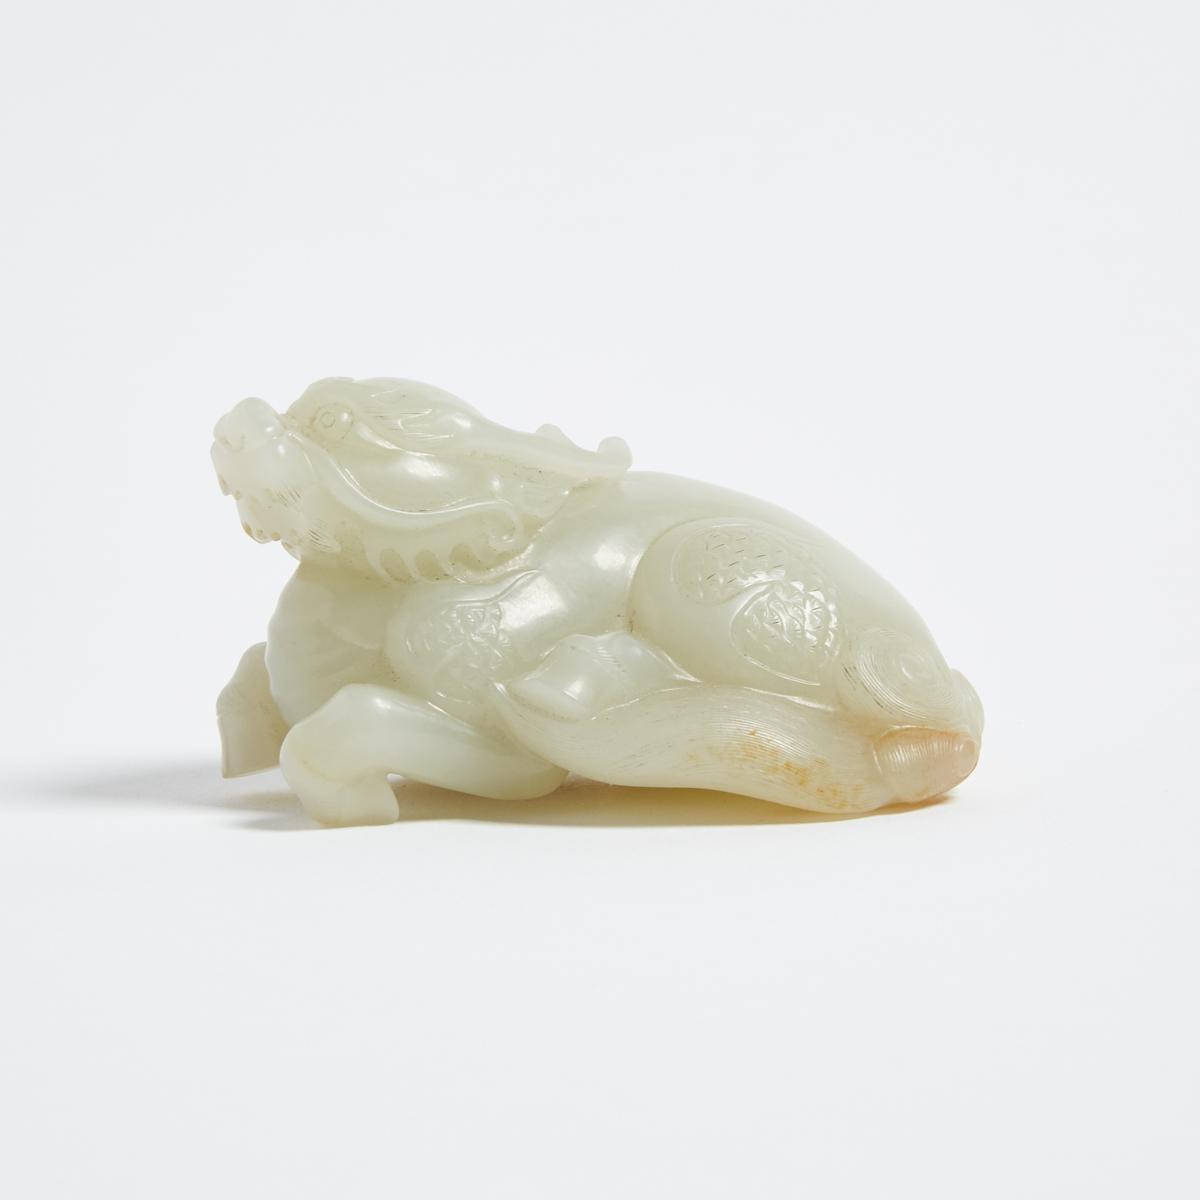 A White and Russet Jade Carved Qilin, 白玉臥麒麟, length 3.5 in — 8.9 cm - Image 2 of 3